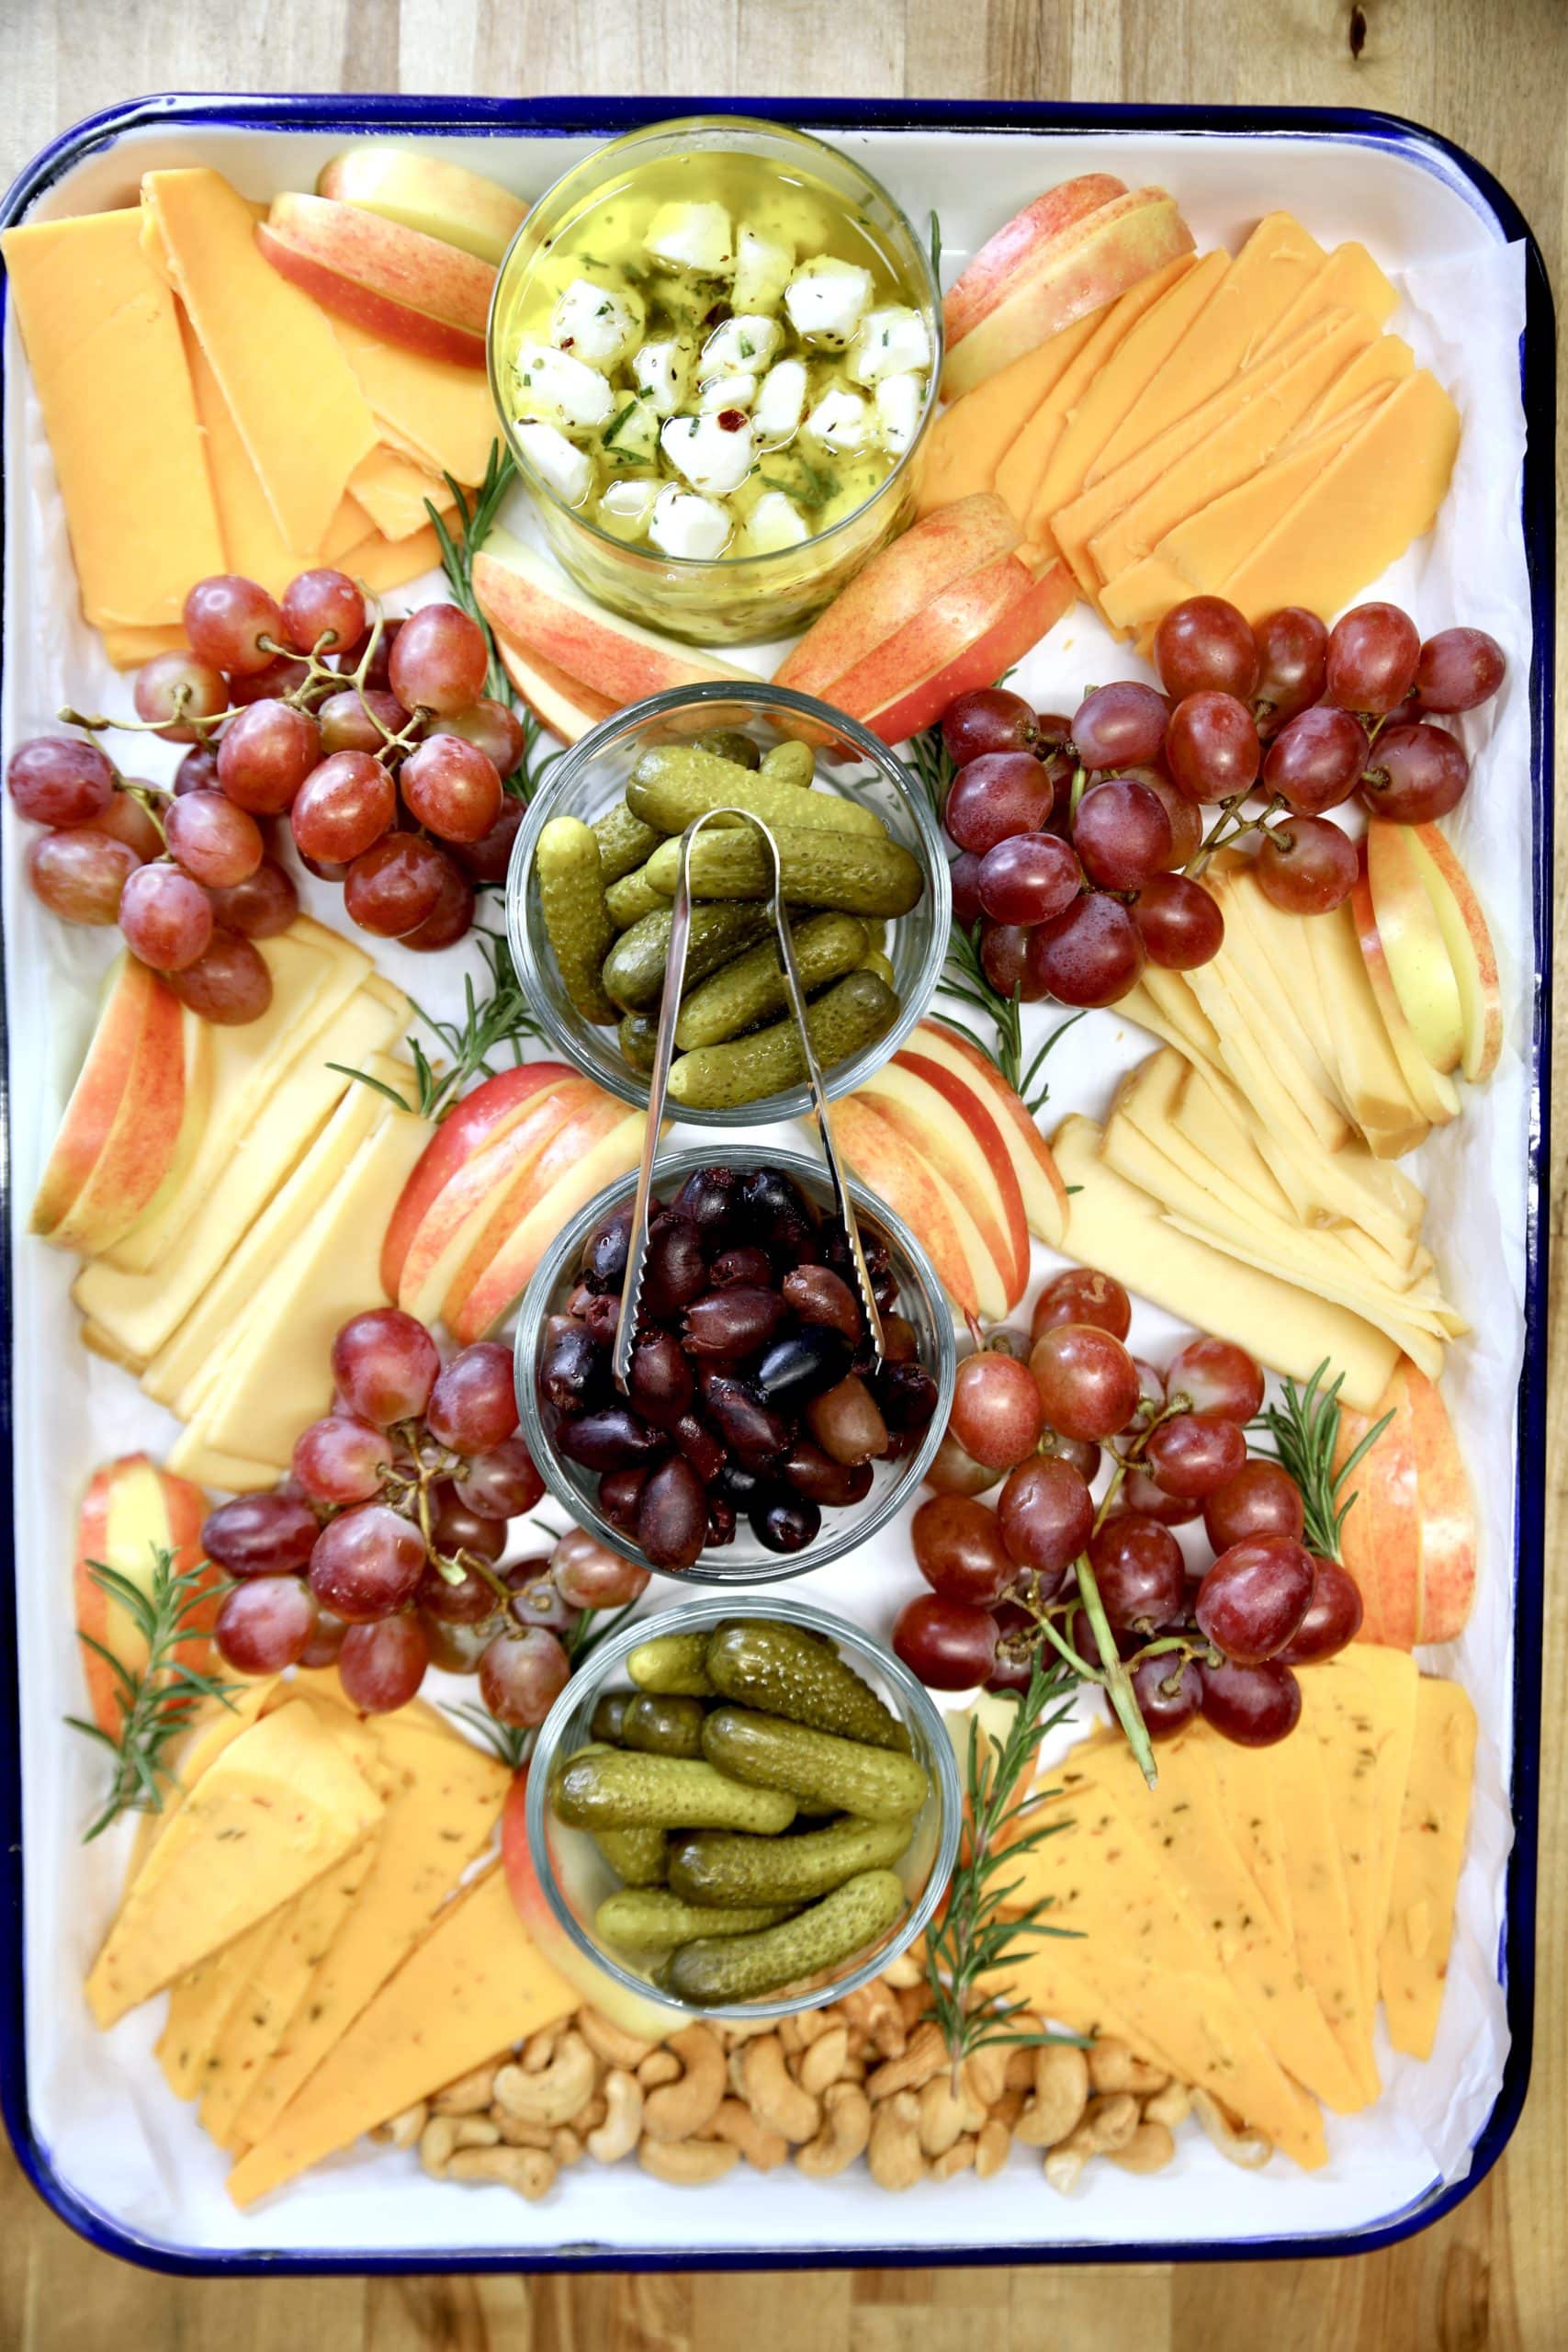 Cheese tray with marinated mozzarella, pickles, olives, fruit.